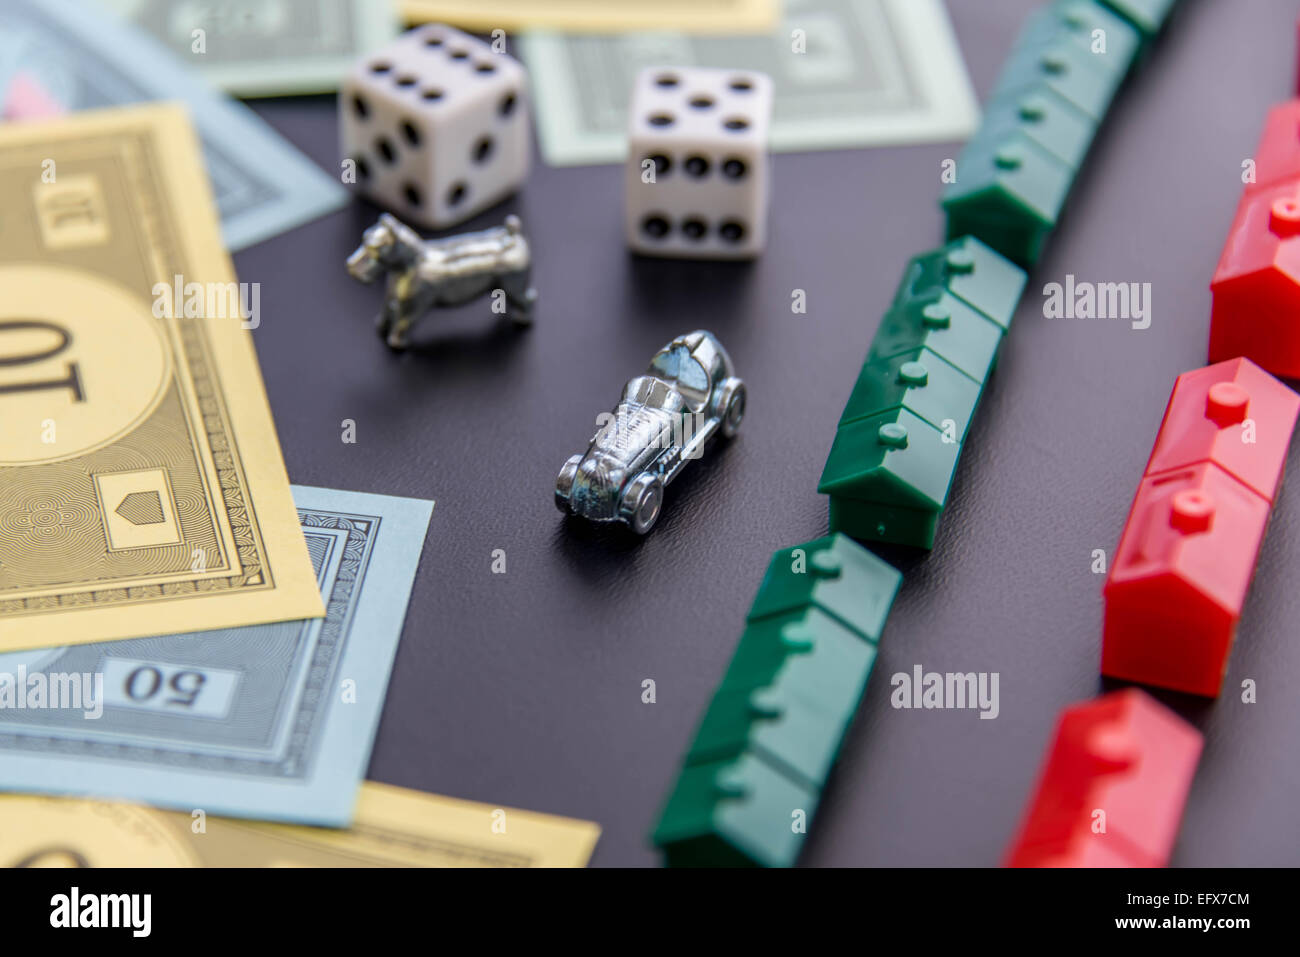 February 8, 2015 - Houston, TX, USA.  Monopoly money, playing pieces and dice Stock Photo